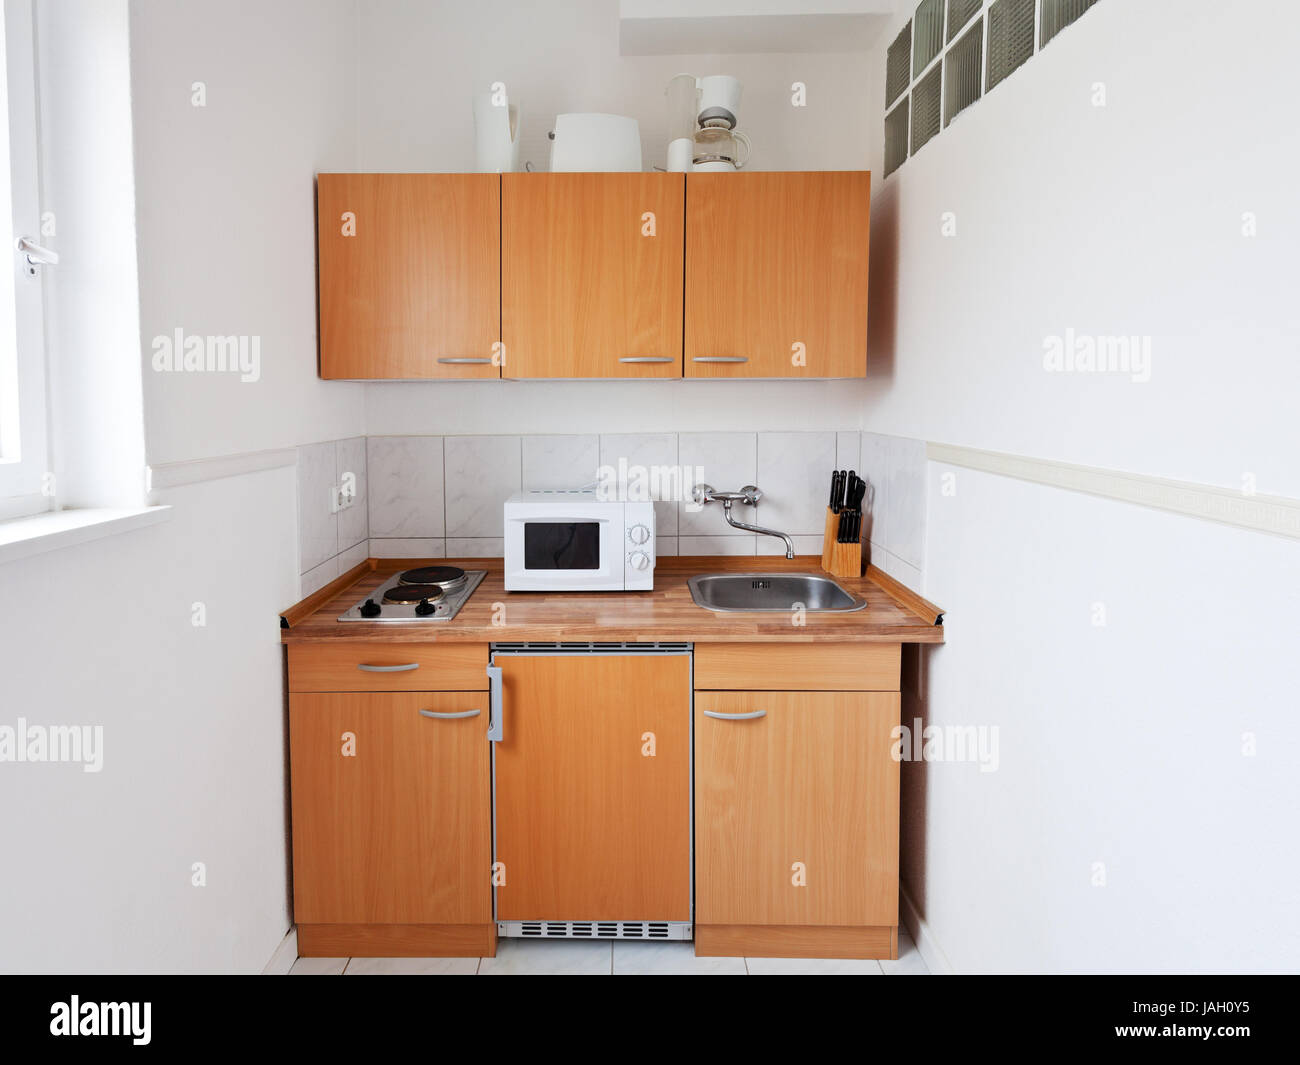 small kitchen with furniture set and kitchen equipment Stock Photo